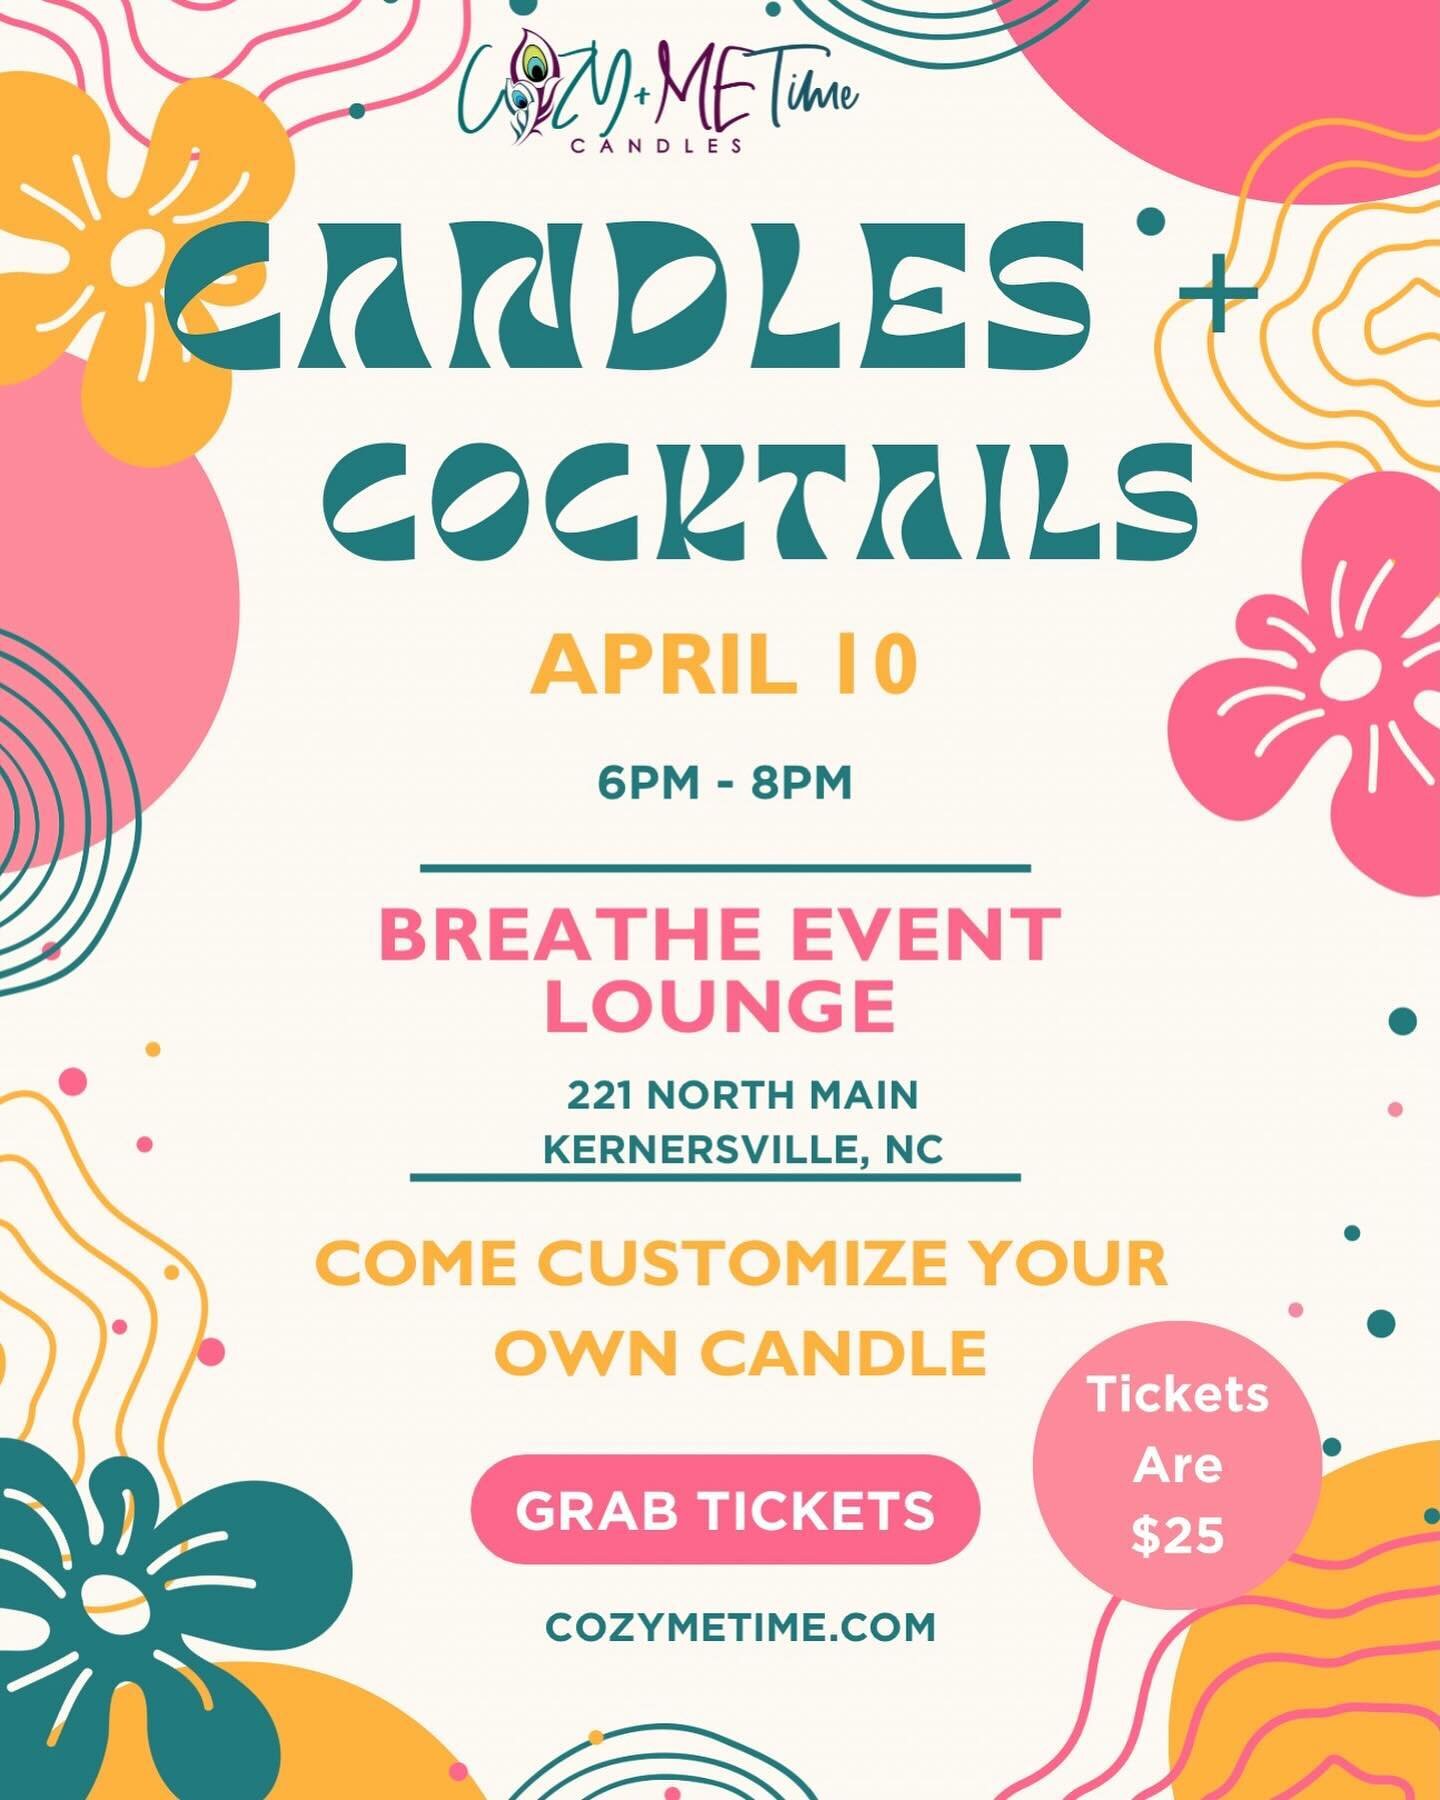 Want to learn how to make your own candles?  Come out April 10! Grab tickets here www.cozymetime.com